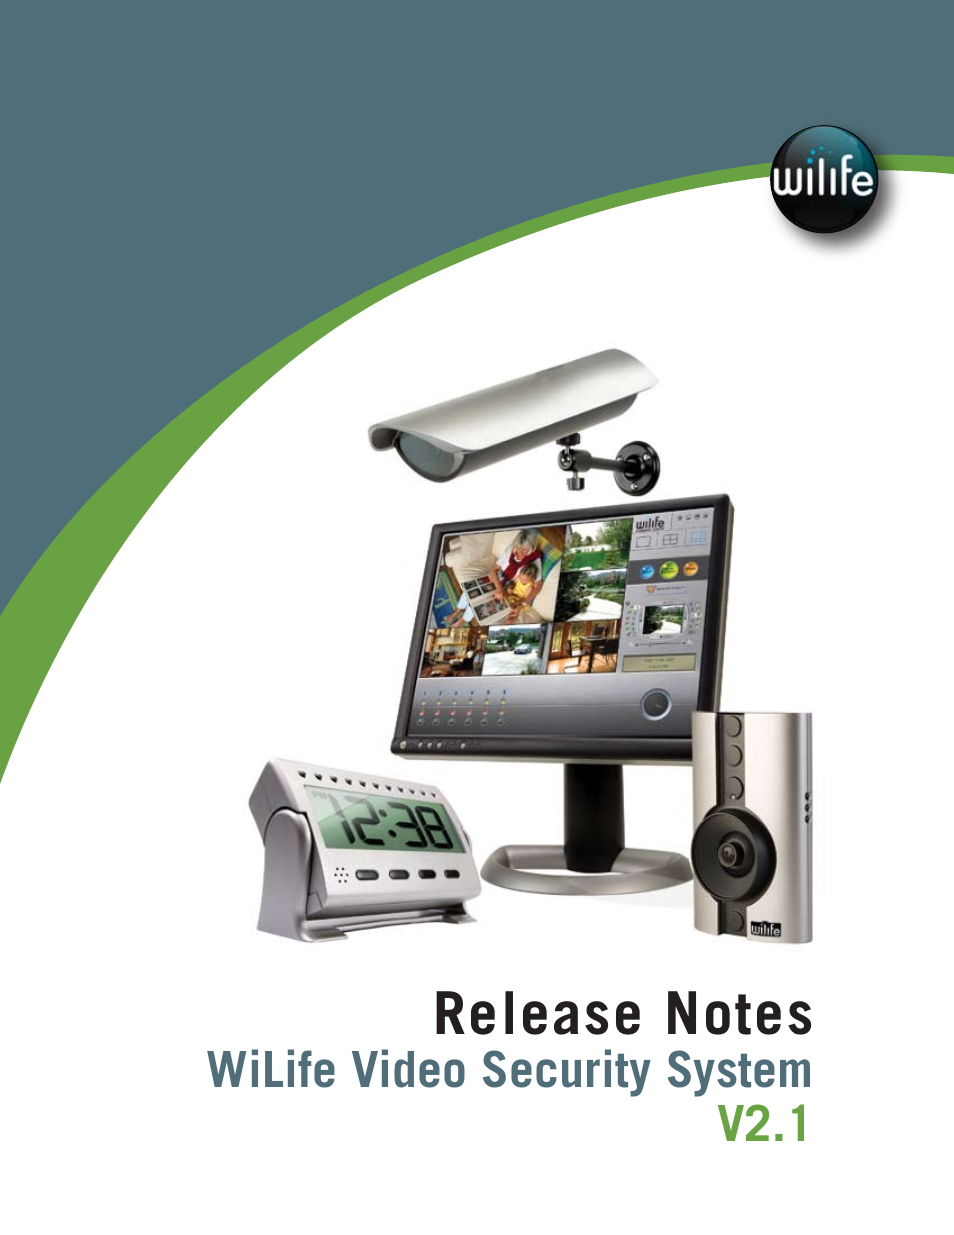 Video Security System